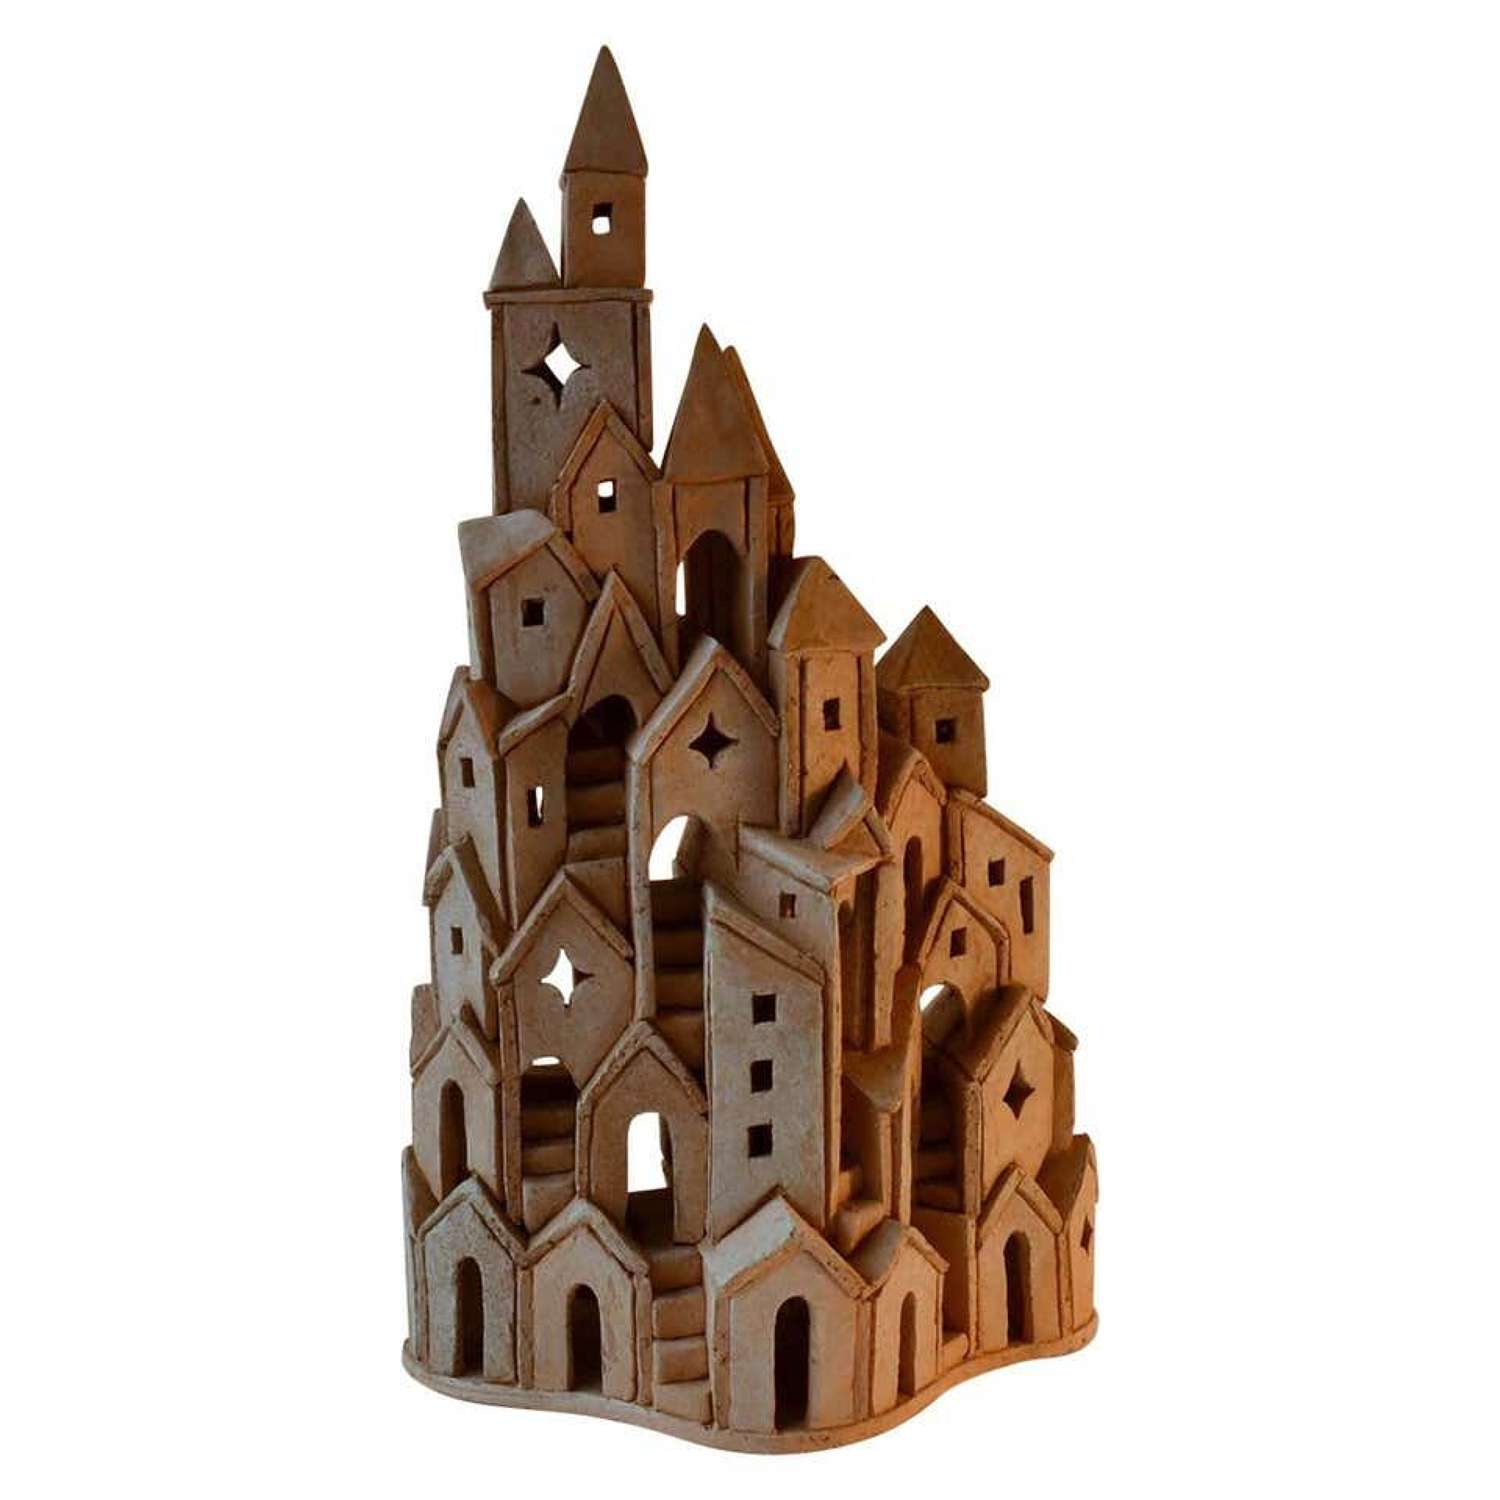 Architectural Ceramic Tower Sculpture, by Arie Bouter